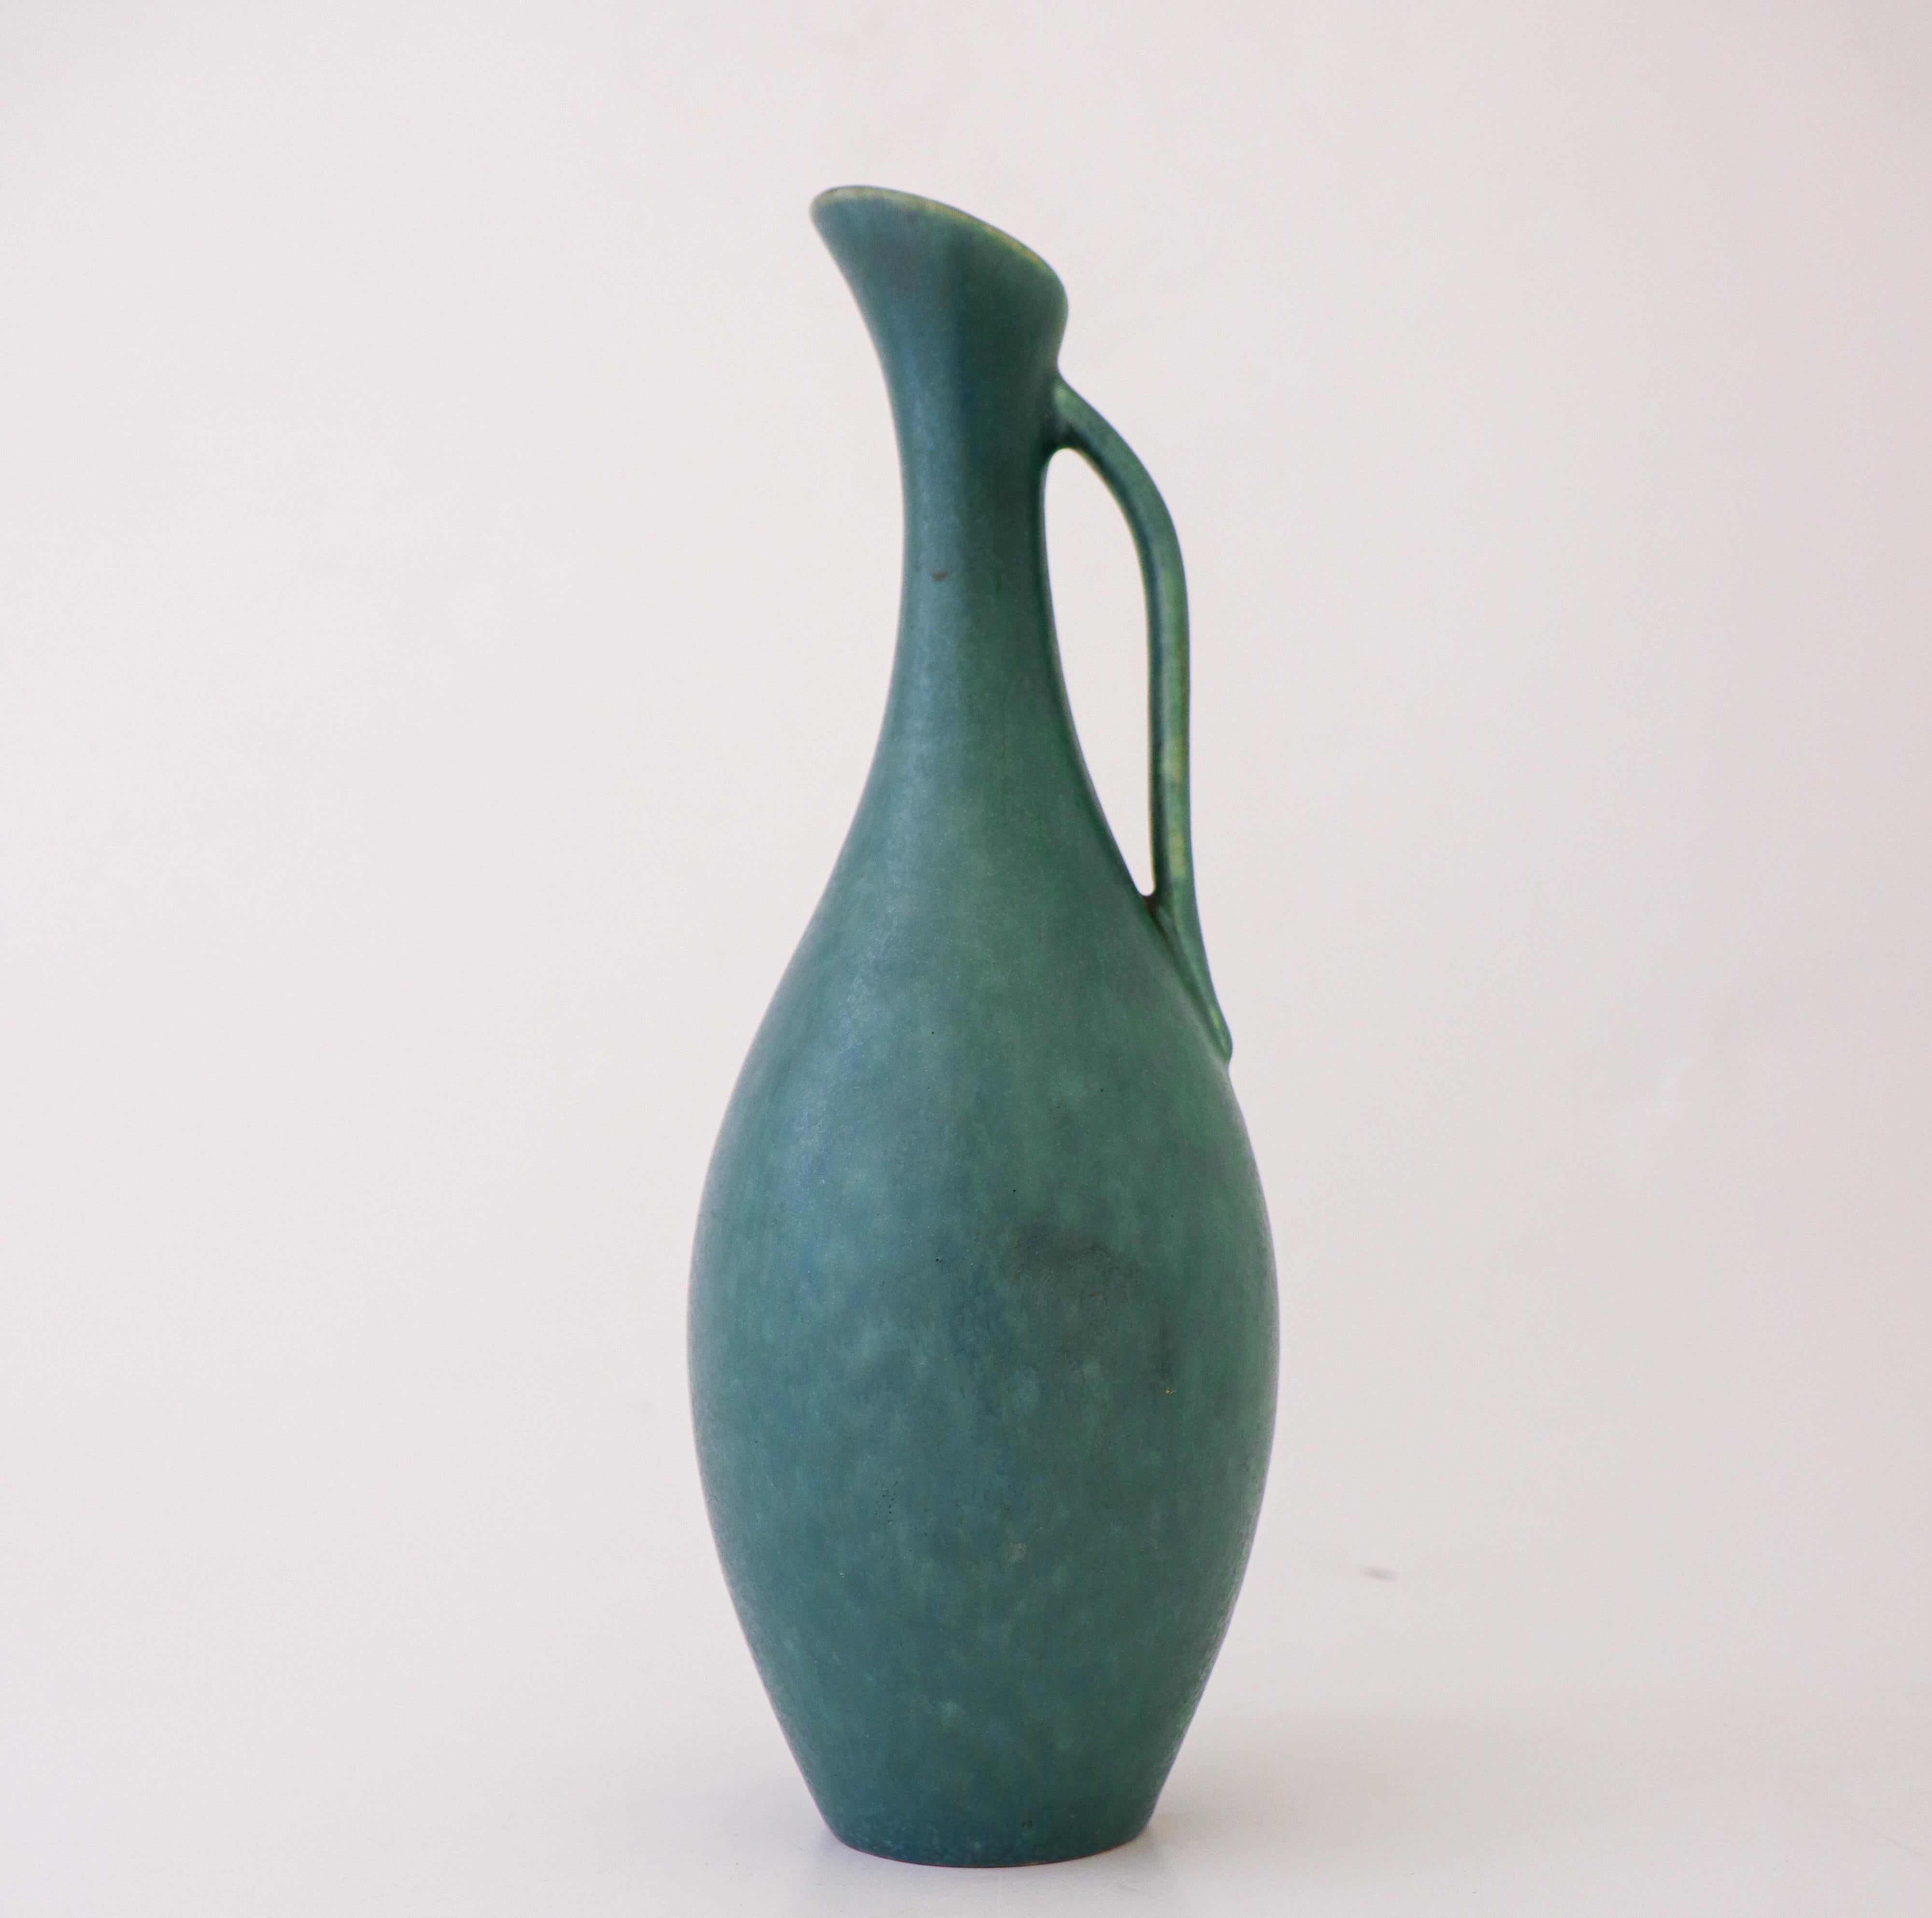 A turquoise ceramic vase designed by Gunnar Nylund at Rörstrand. It is 26.5 cm (10.4